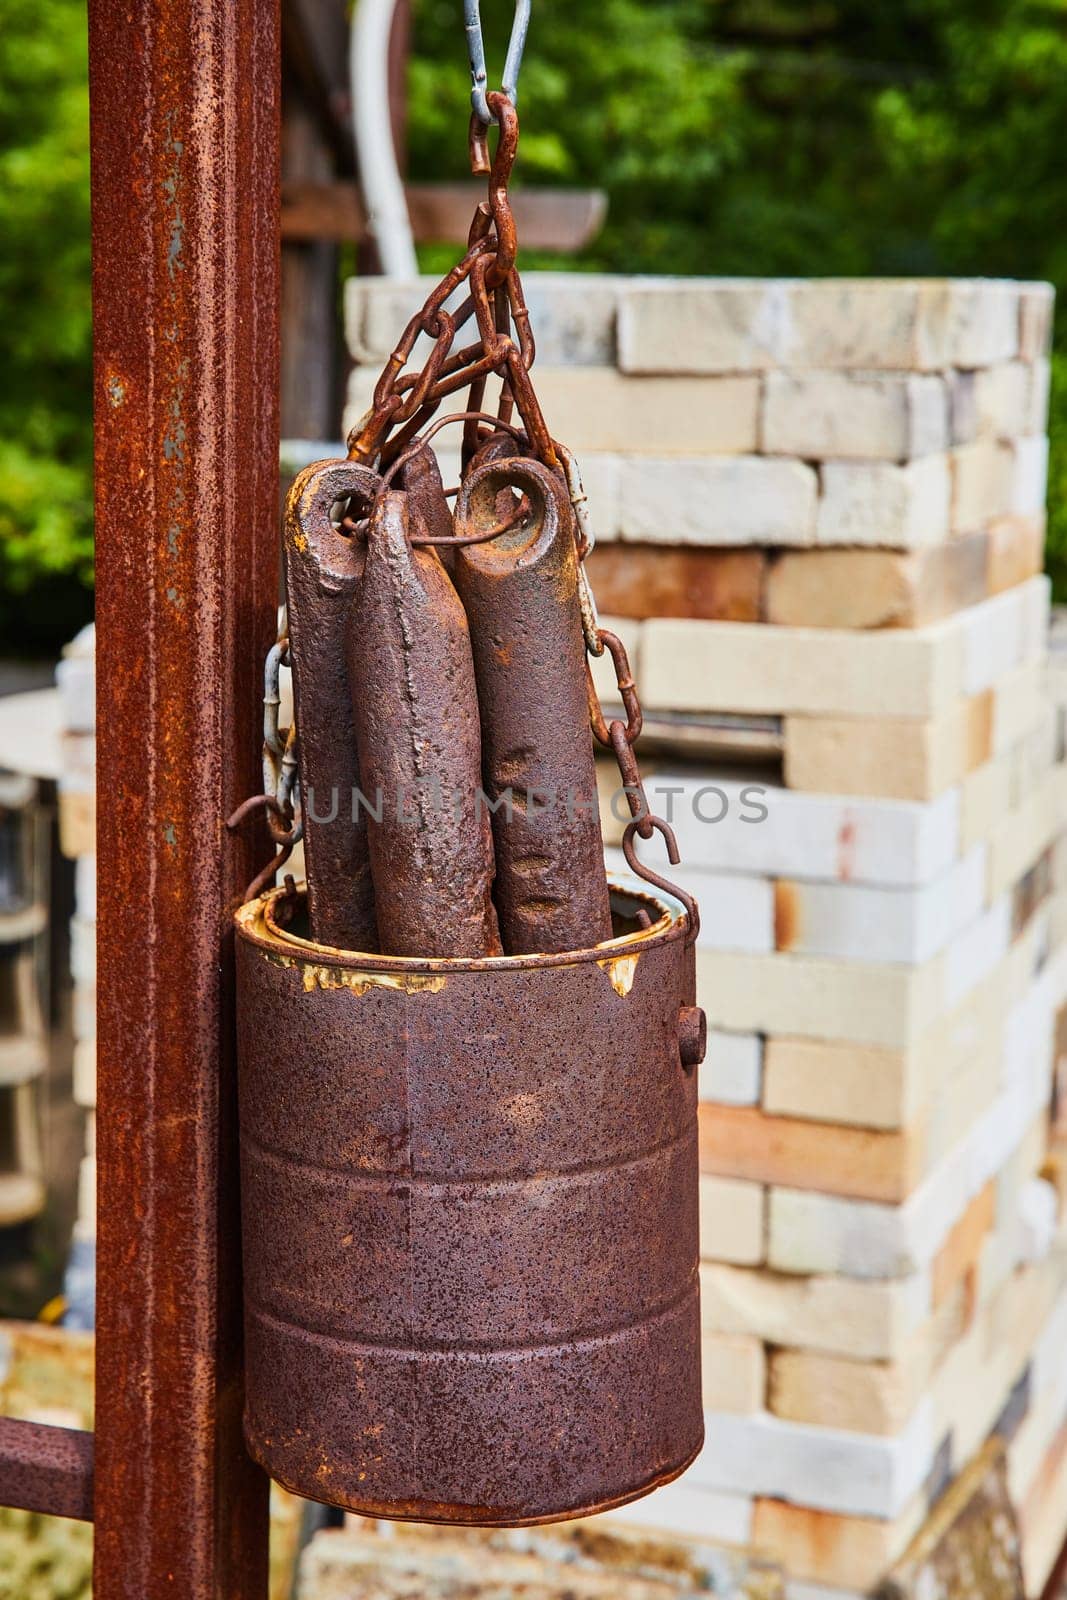 Rustic Counterweight System with Chain in Outdoor Setting by njproductions